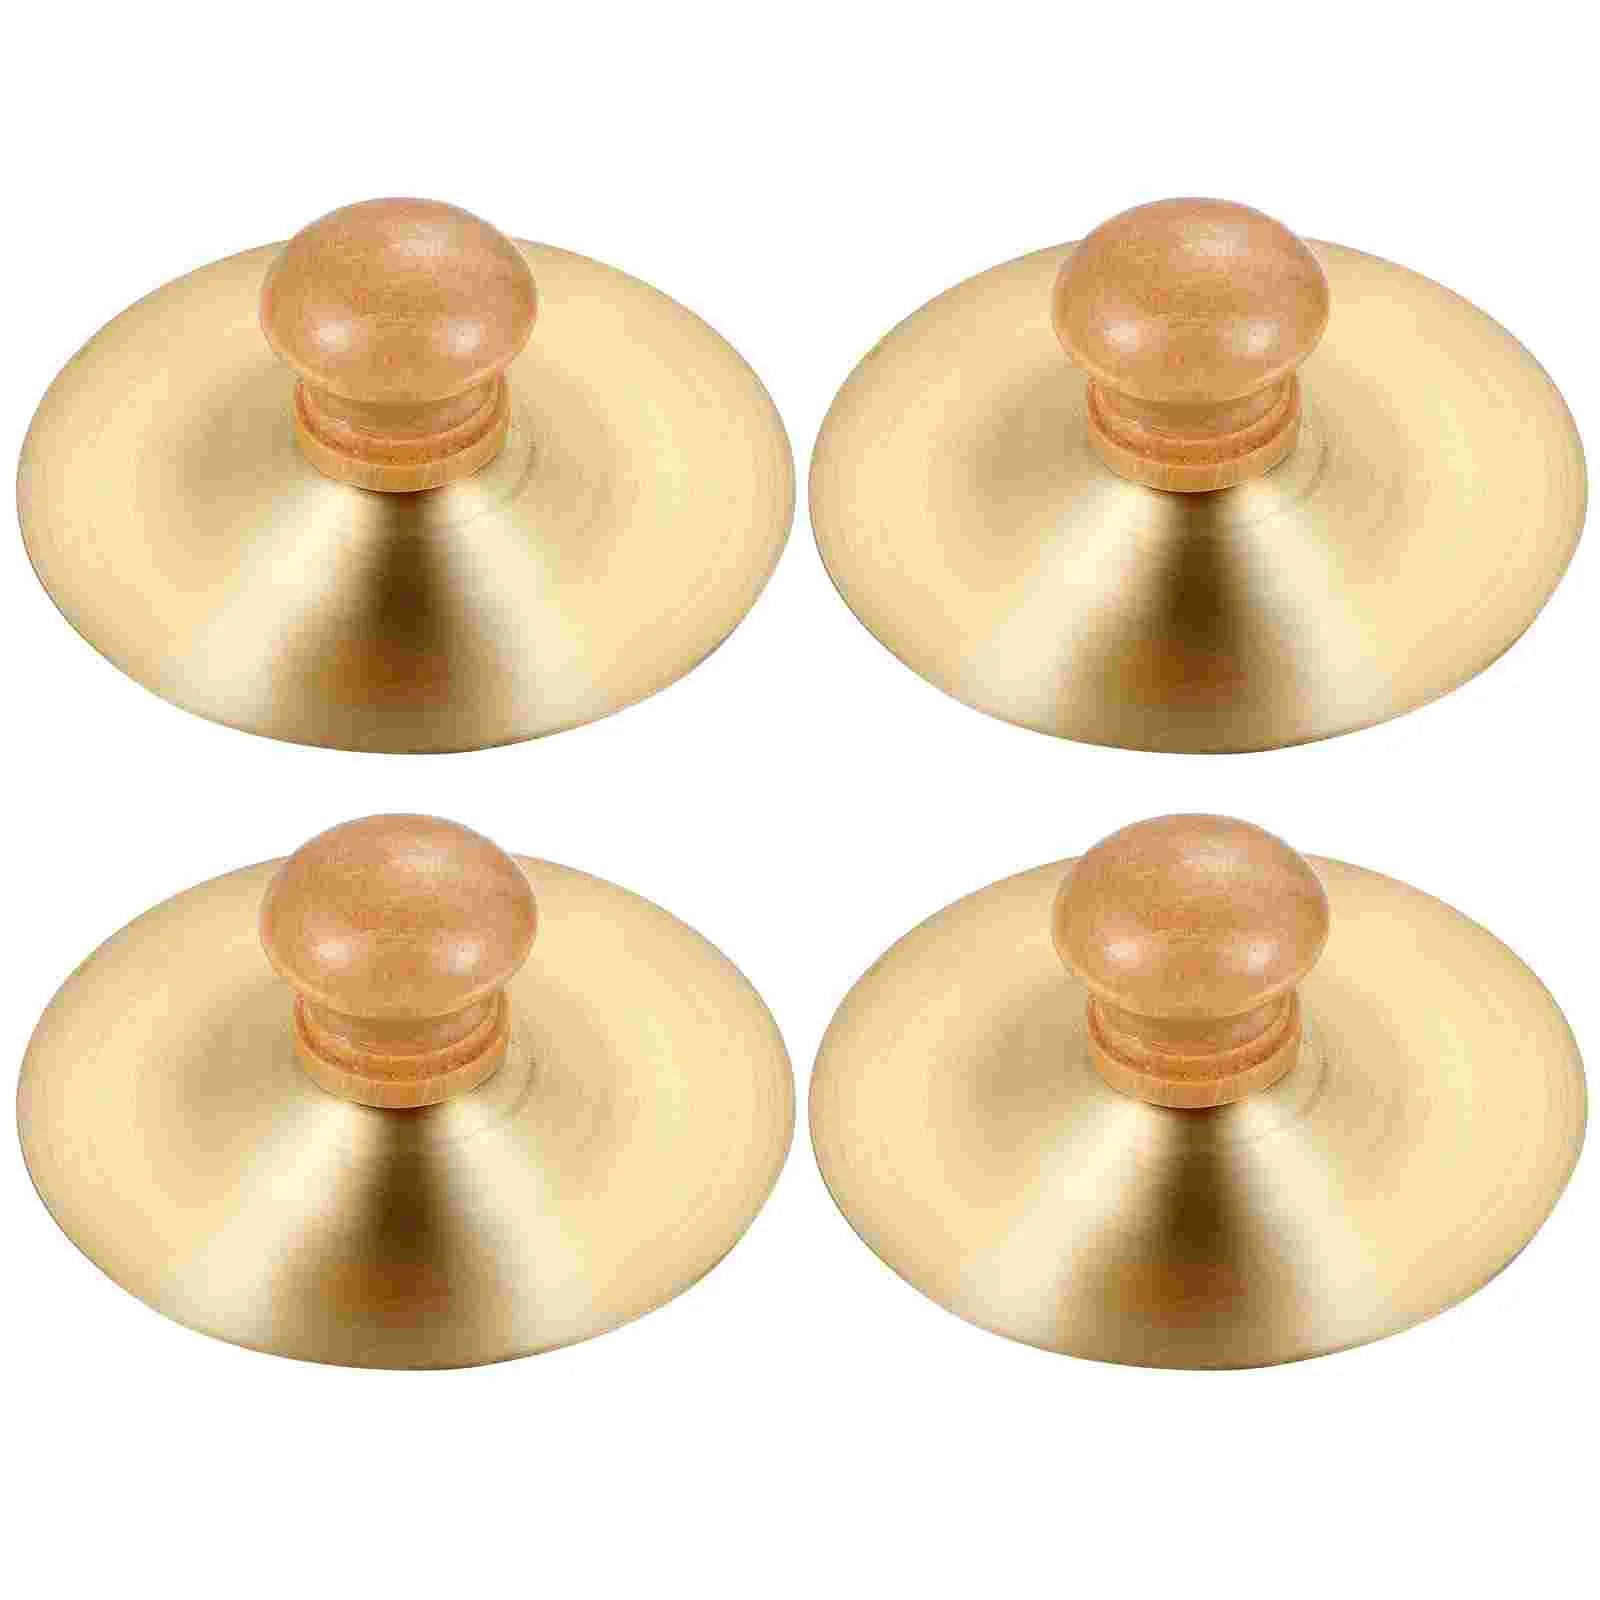 Durable Belly Iron Dance Finger Cymbal - Brass Musical Instrument for Dancing